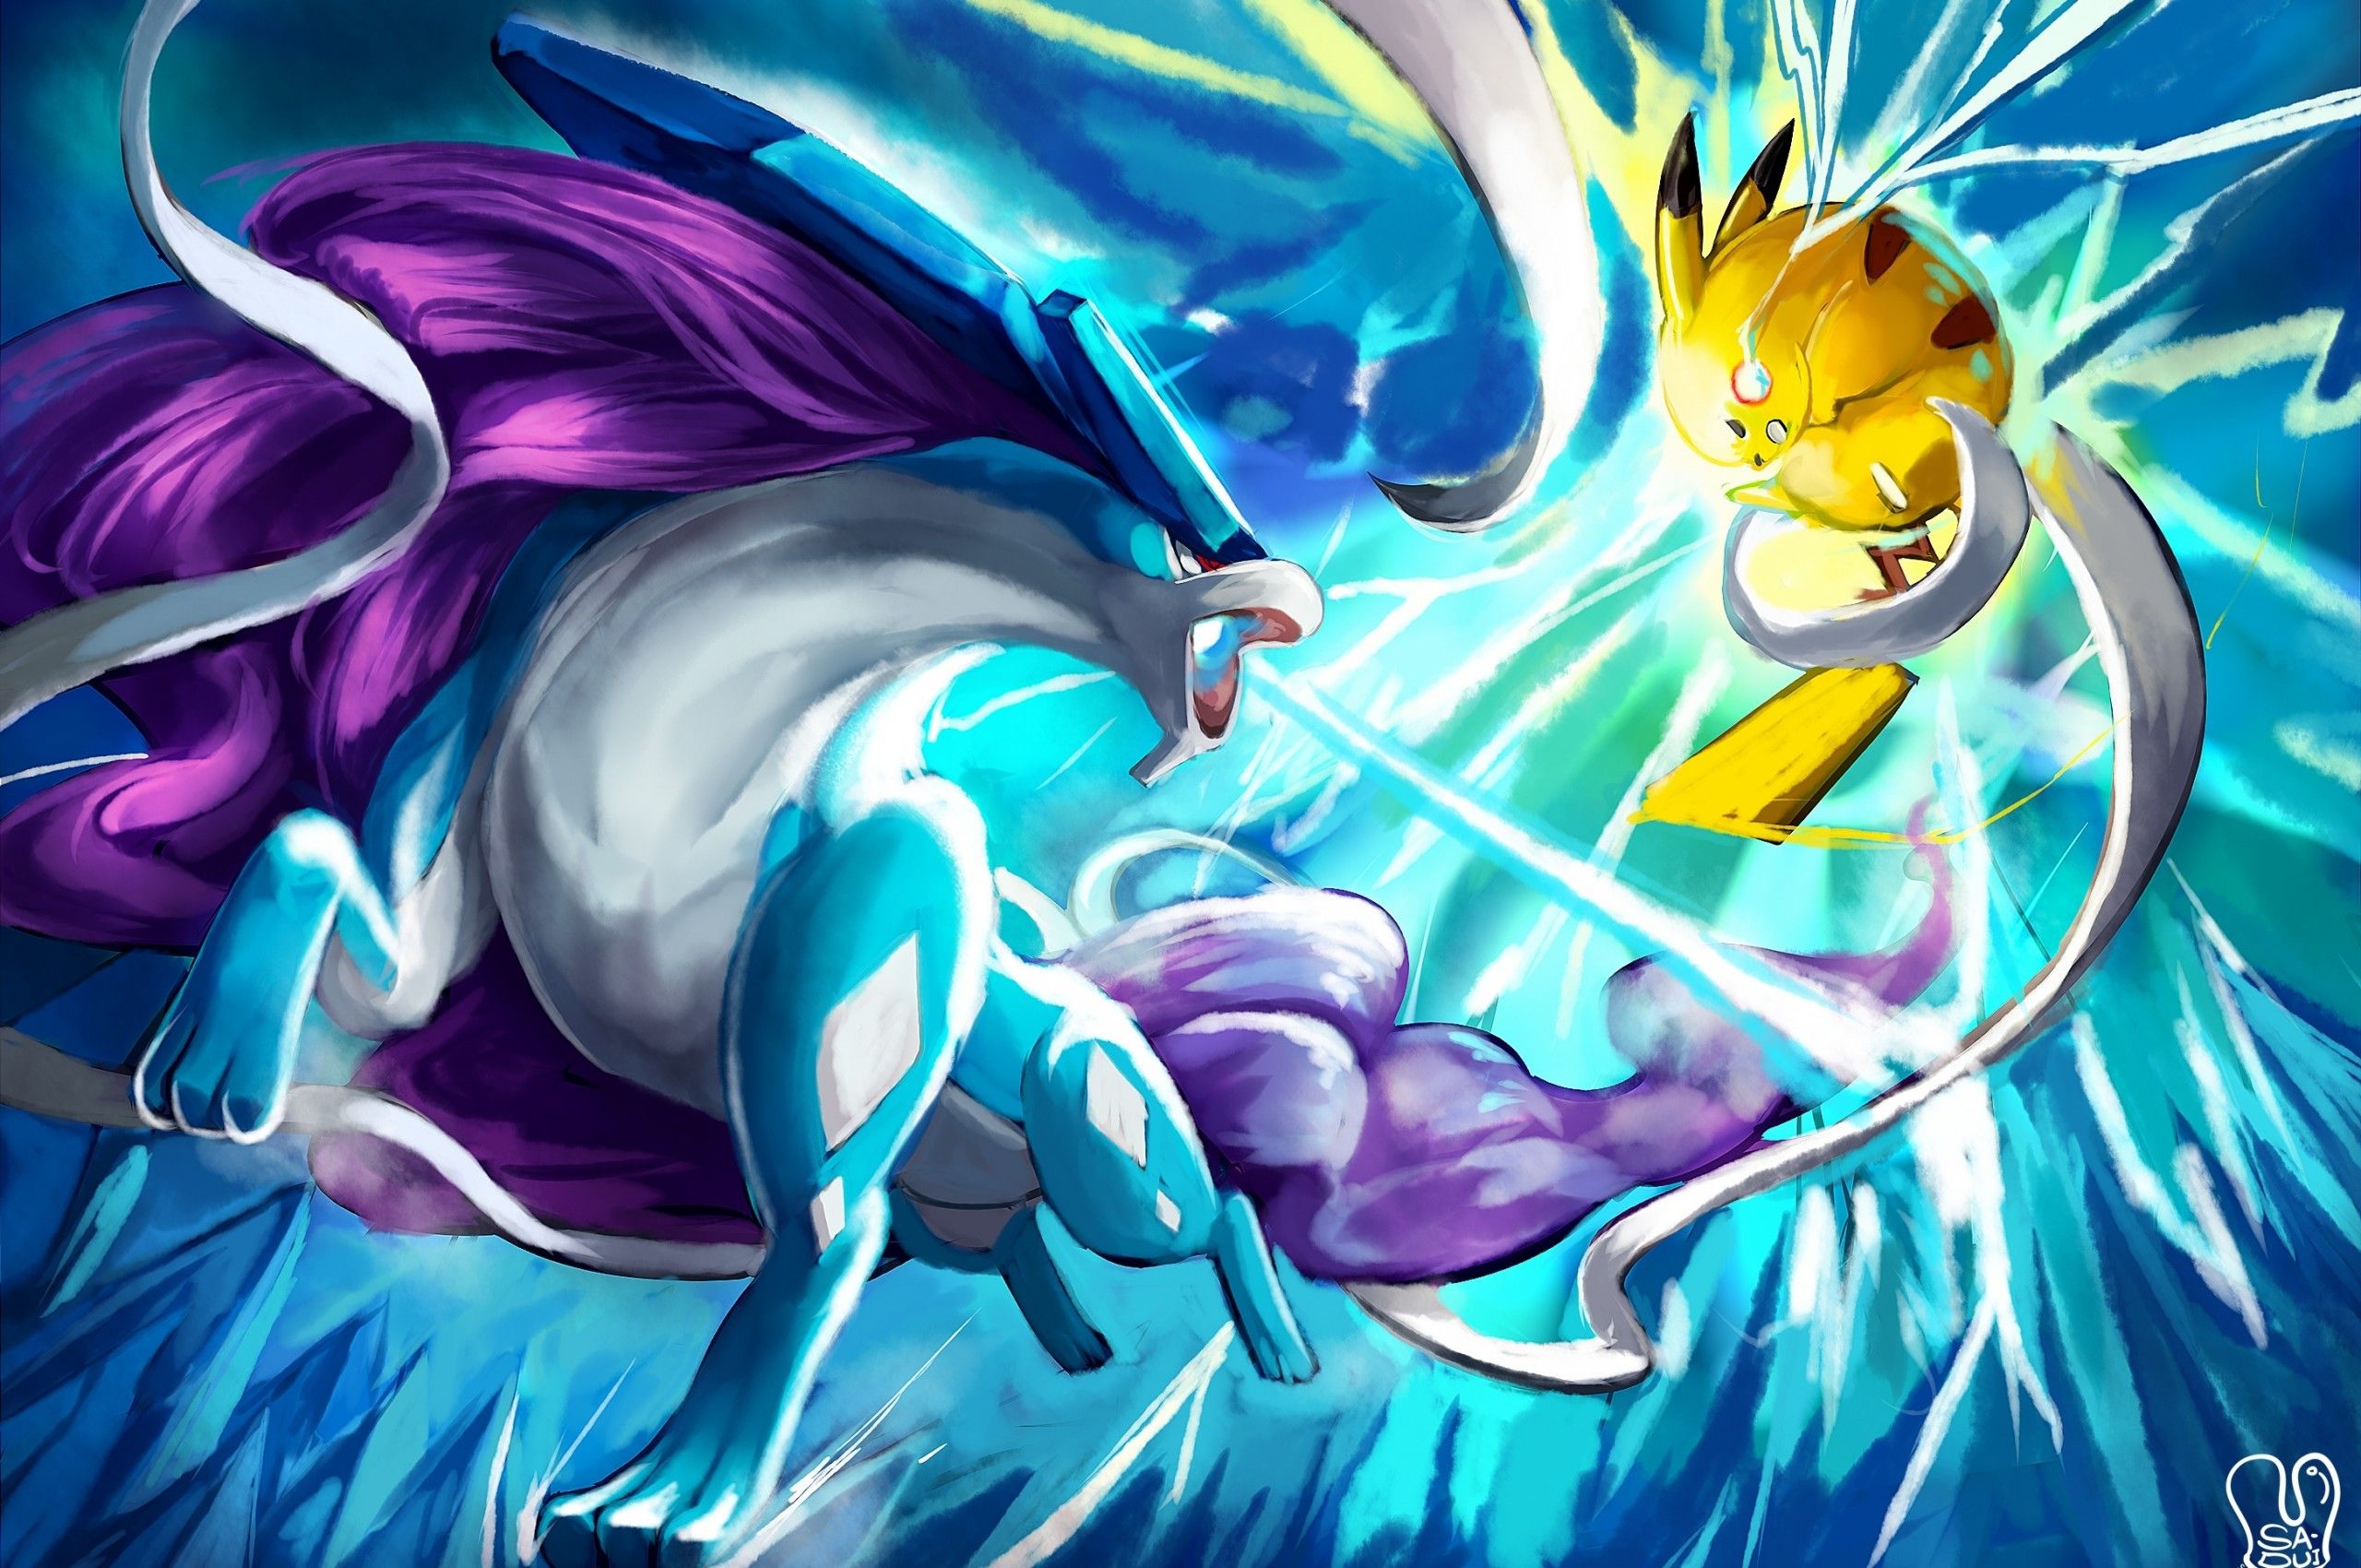 Download 2560x1700 Pokemon, Pikachu, Suicune, Fight Wallpaper for Chromebook Pixel